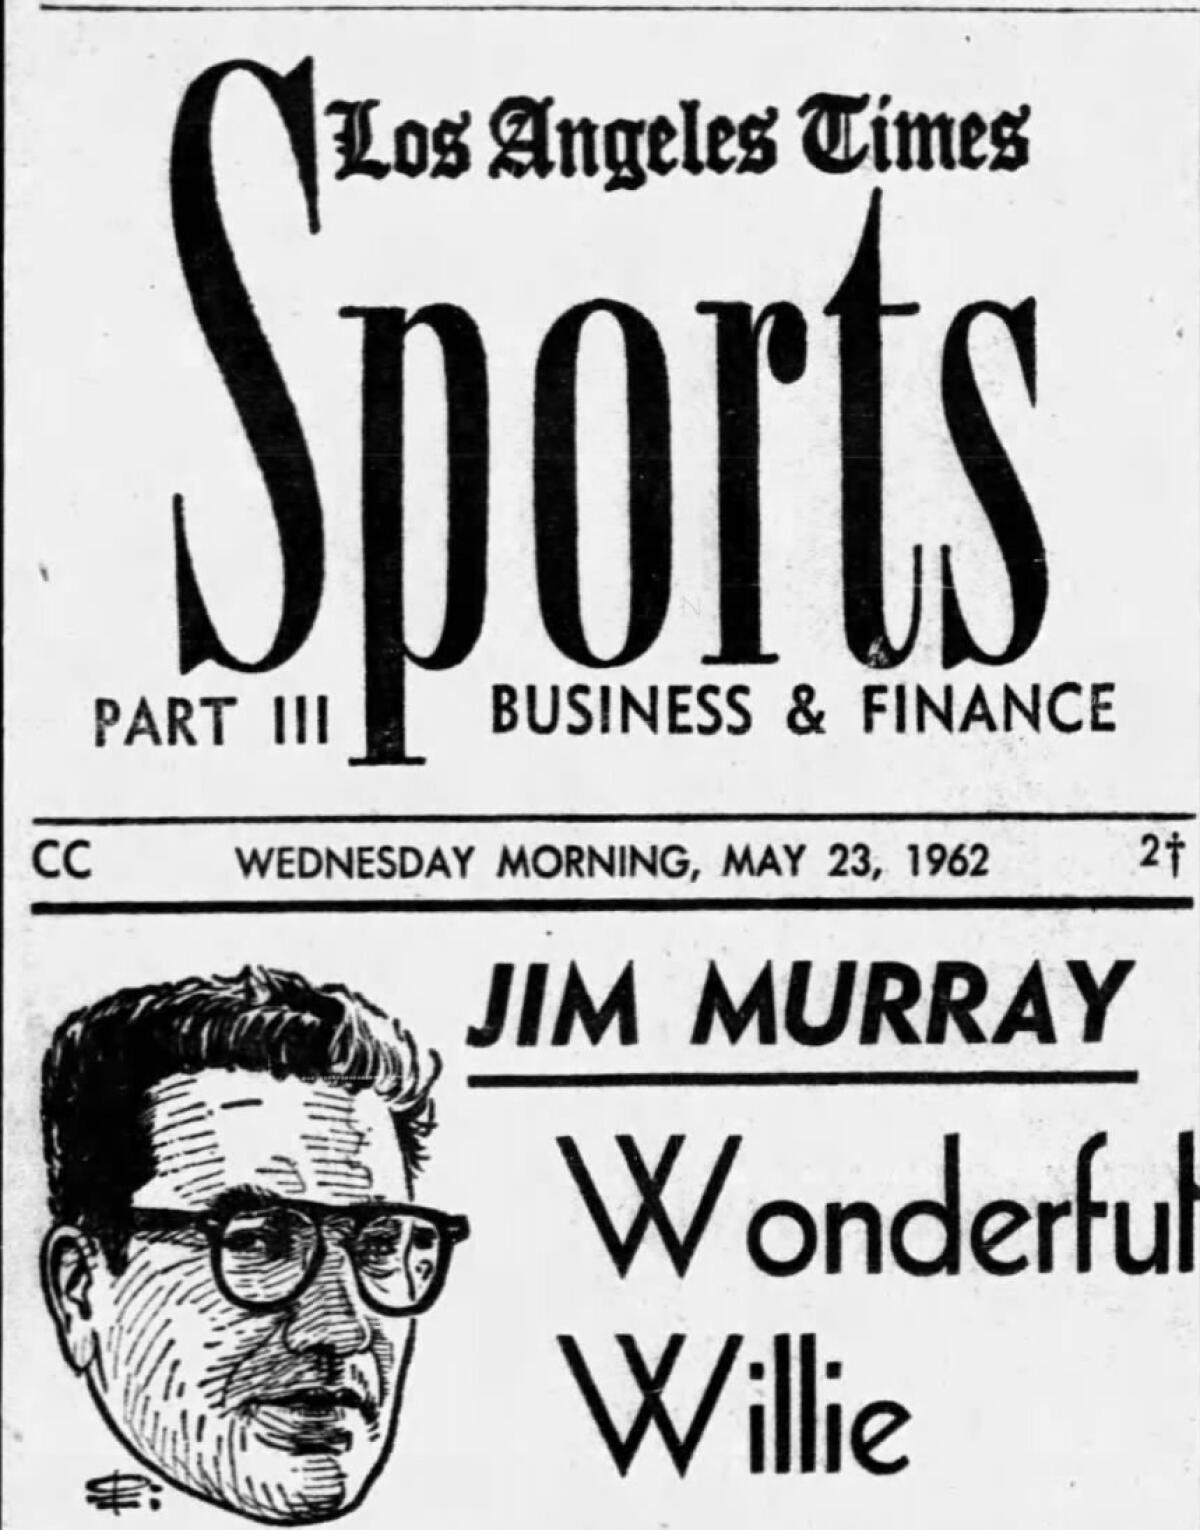 Jim Murray's face sits alongside a headline "Wonderful Willie" on the May 23, 1962, L.A. Times sports section cover.